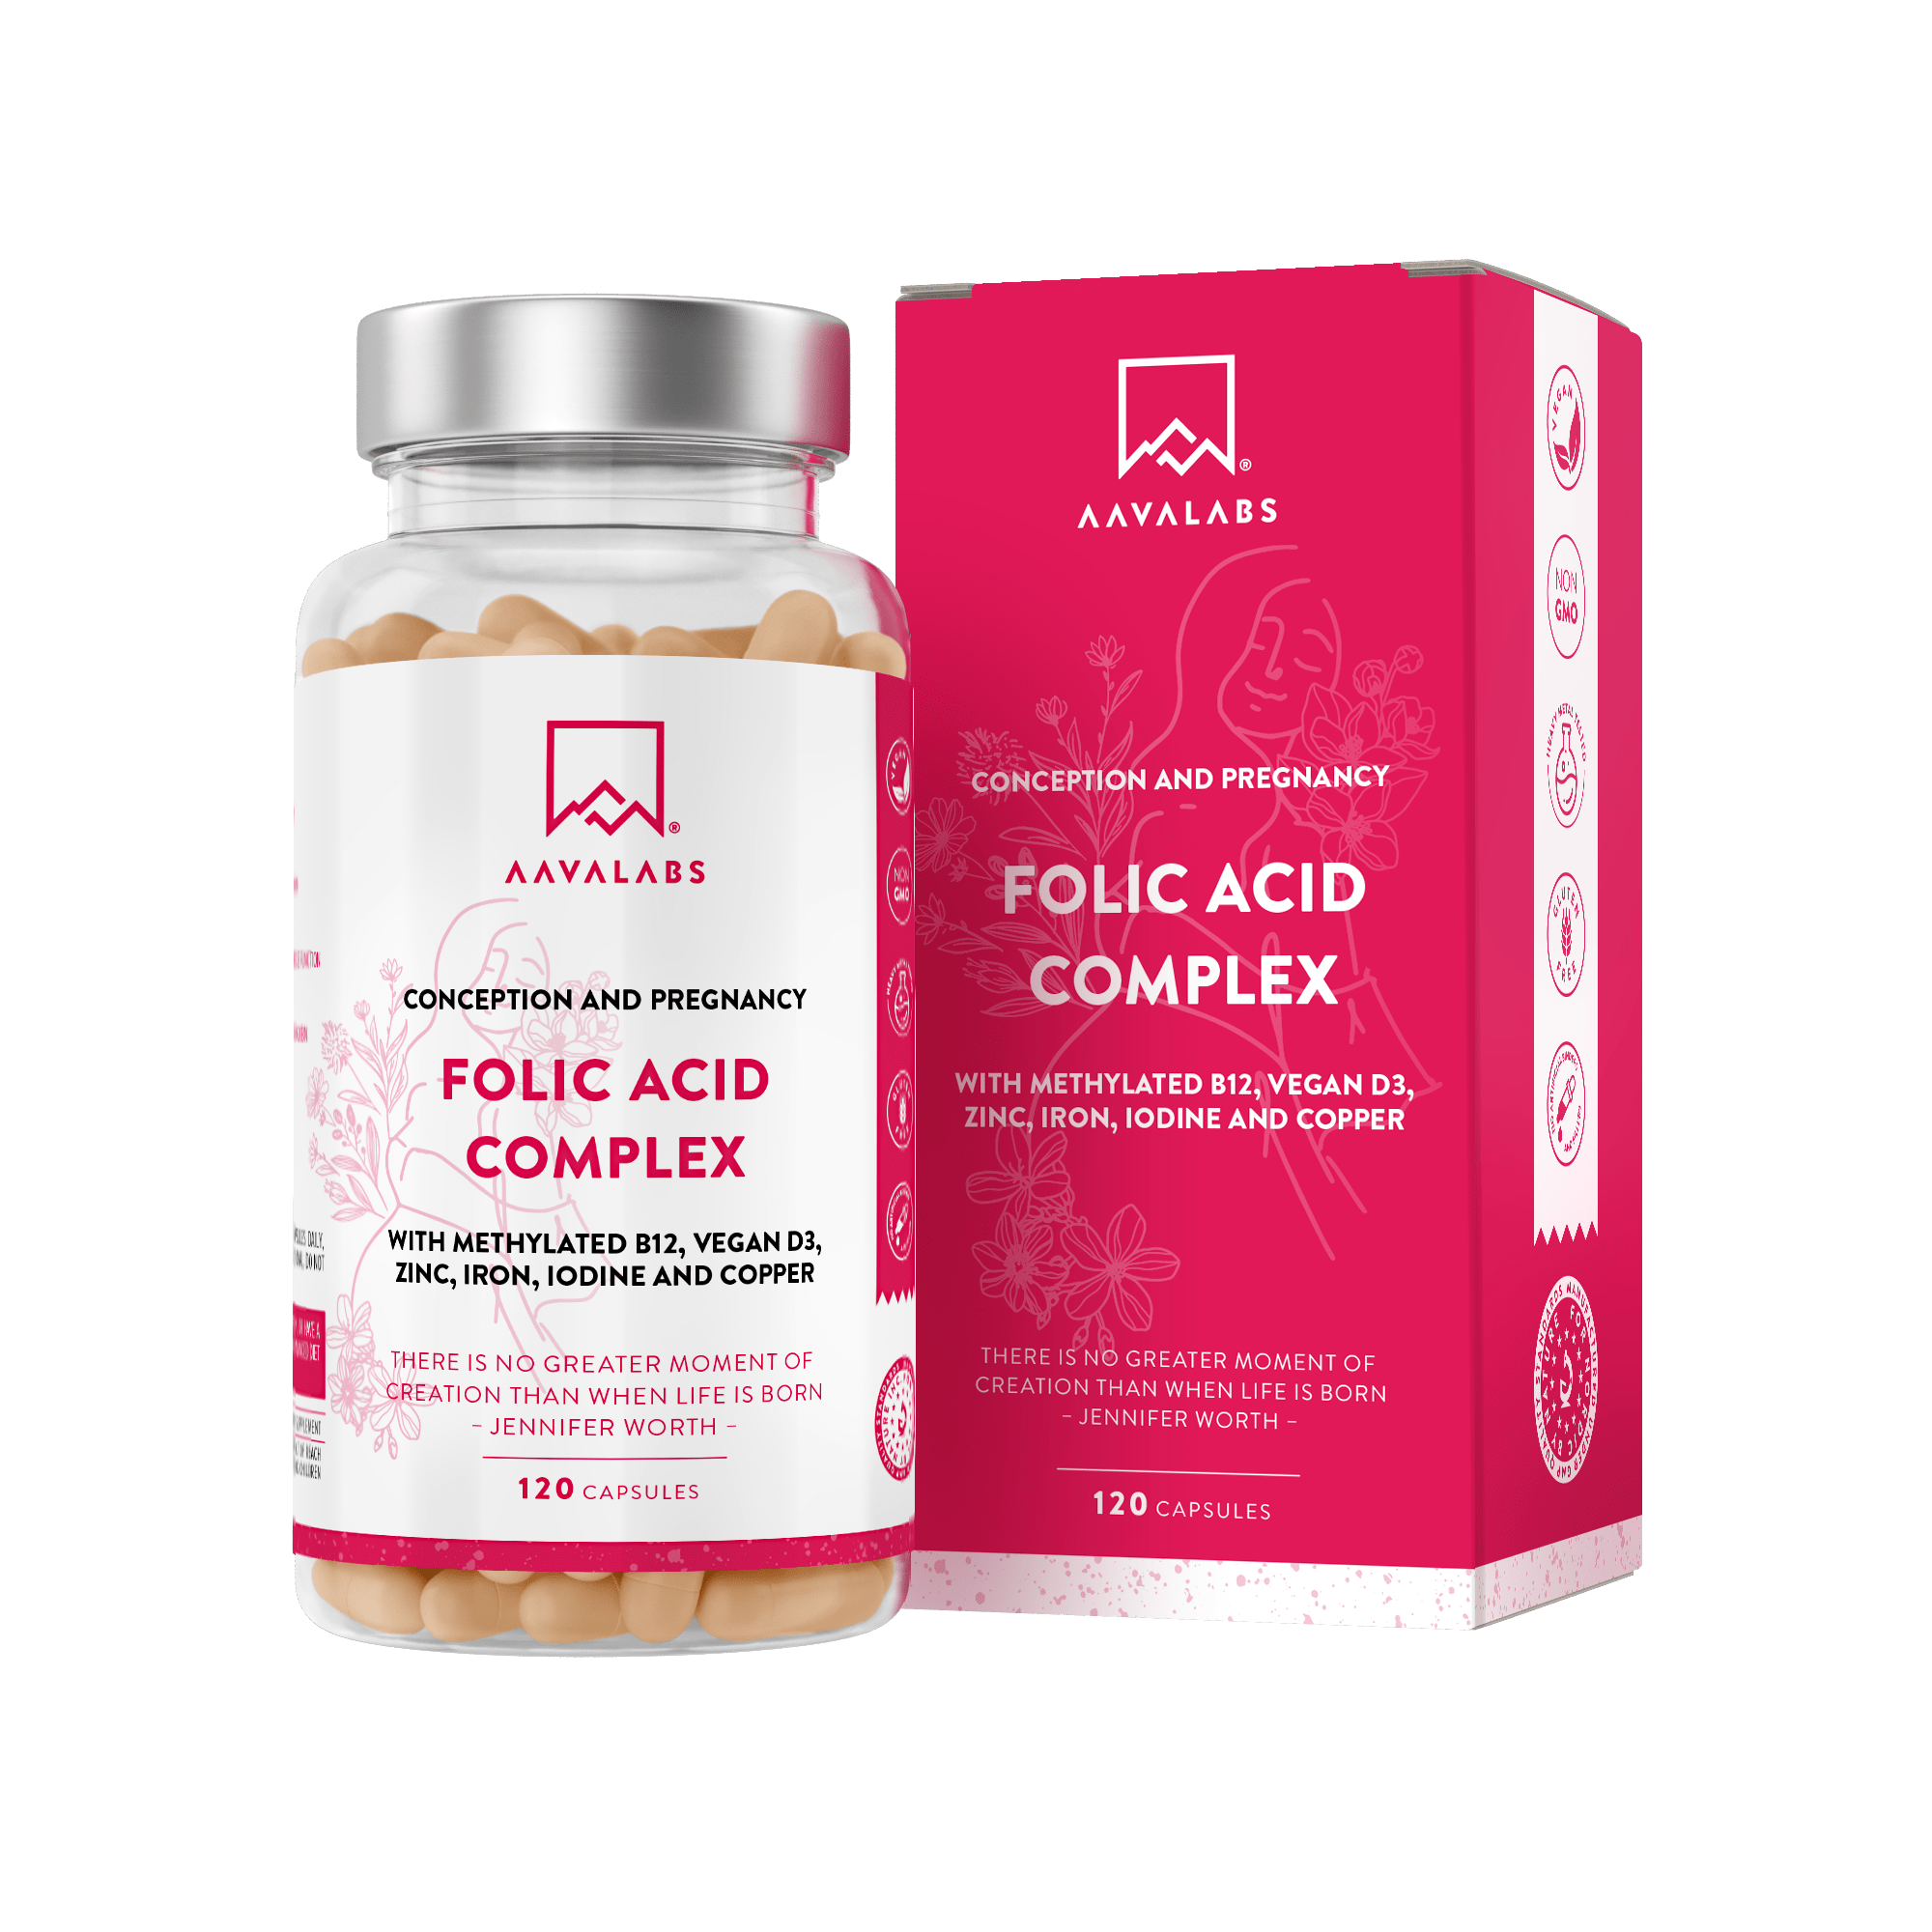 Folic Acid Complex supplement bottle and box - AAVALABS